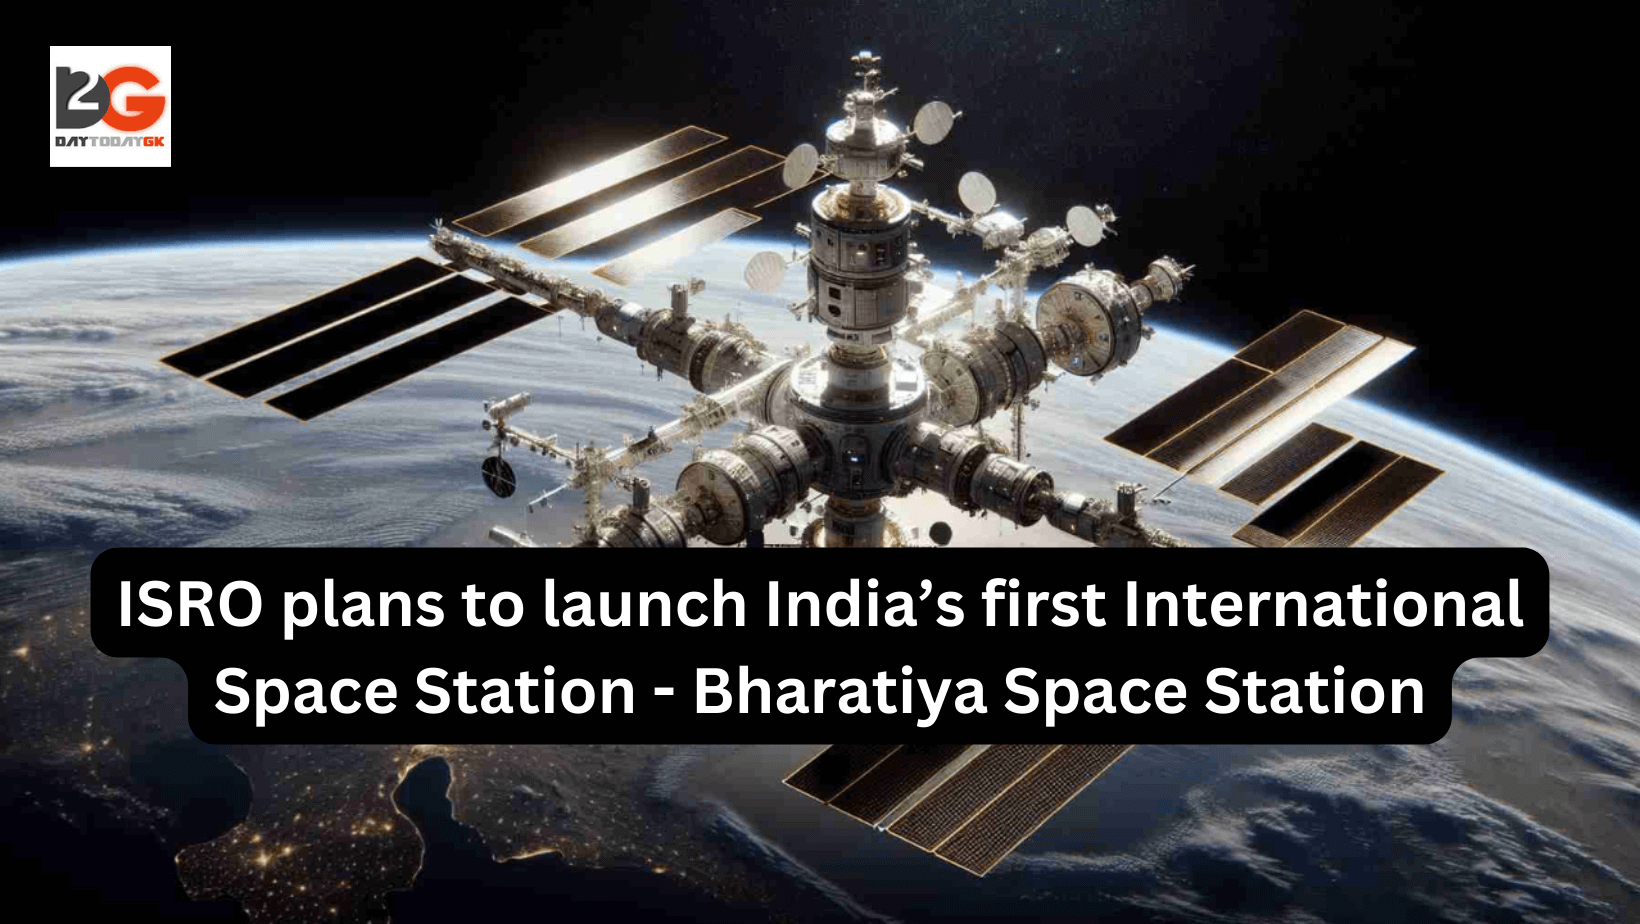 ISRO plans to launch India’s first International Space Station – Bharatiya Space Station